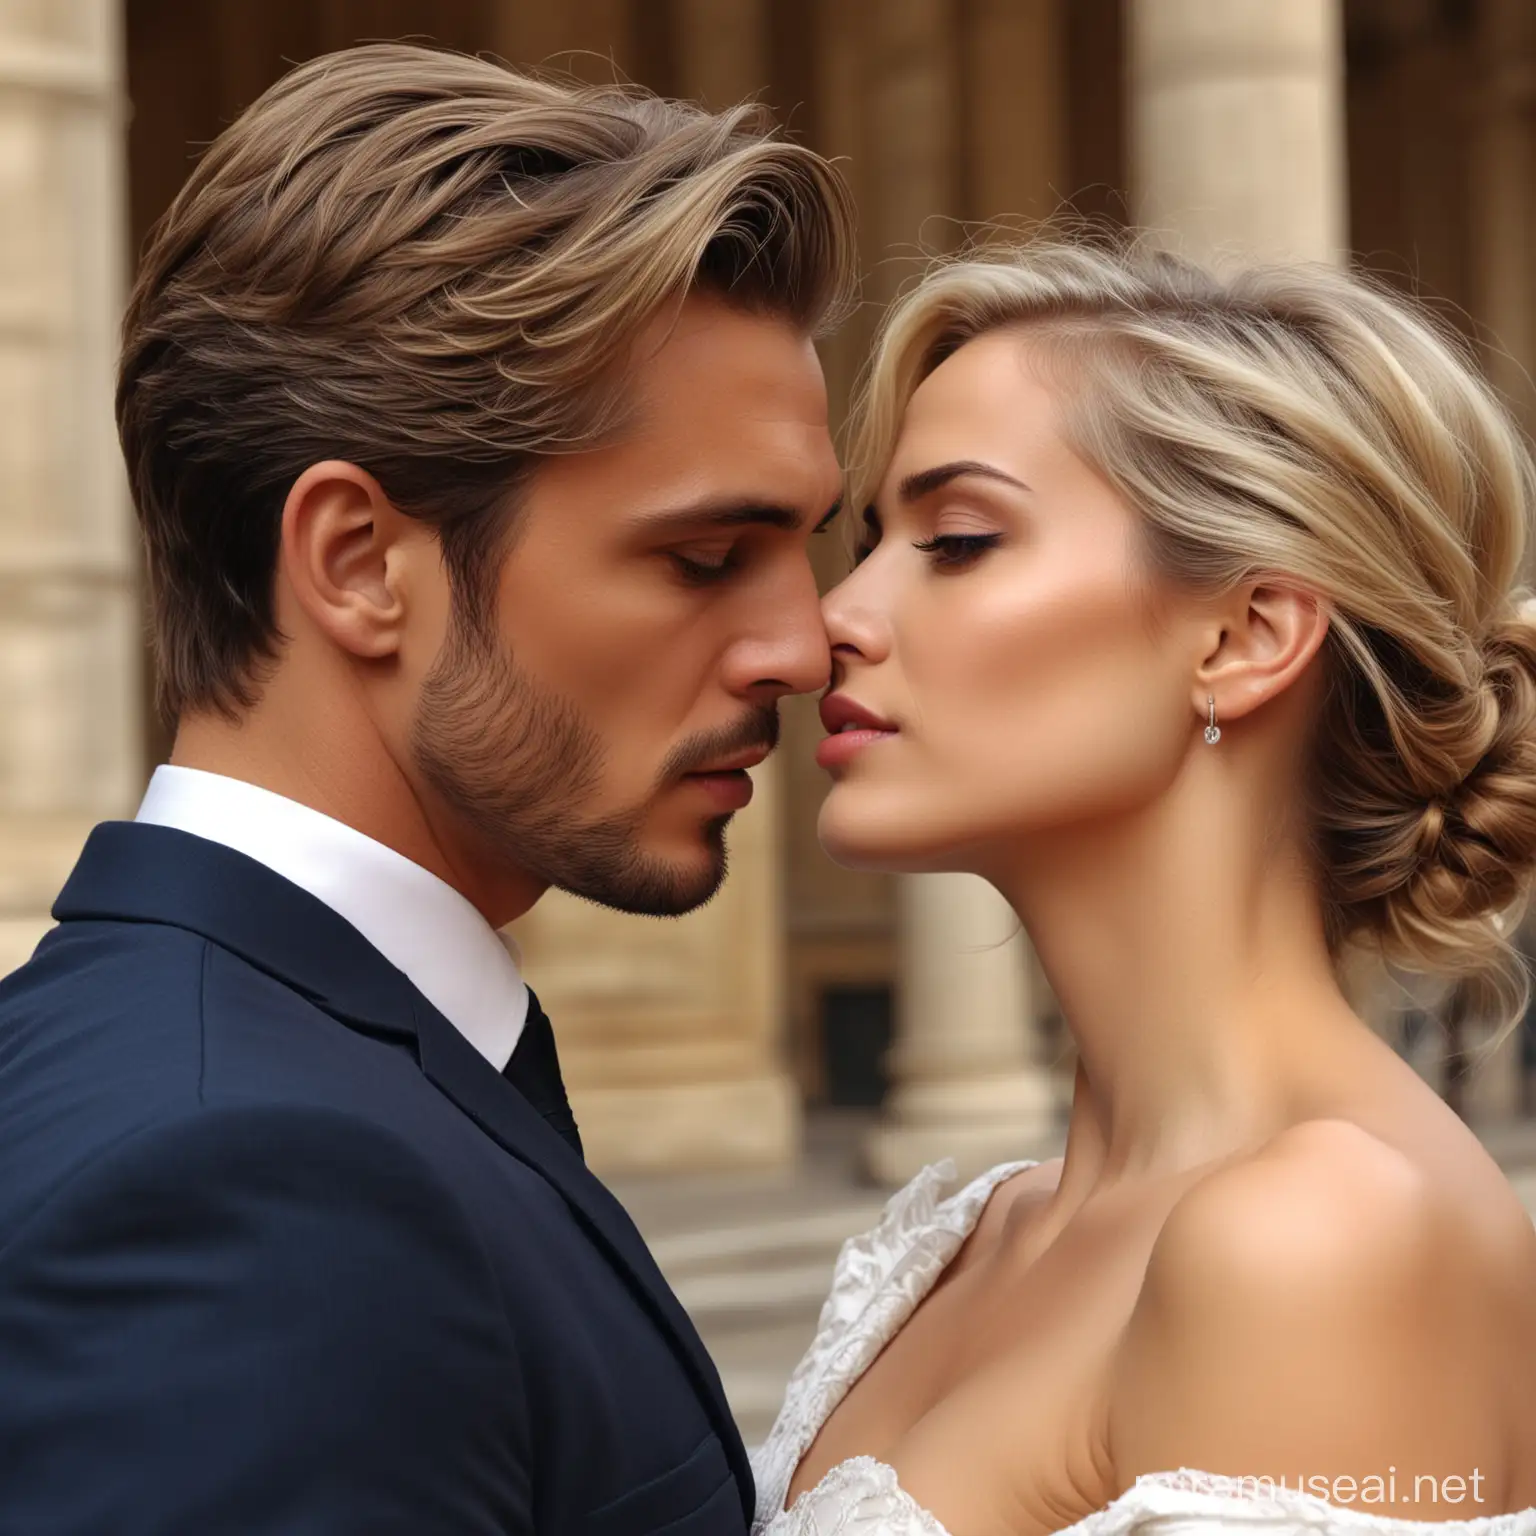 Rugged Blond Gentleman and Model Brunette in Palace Embrace